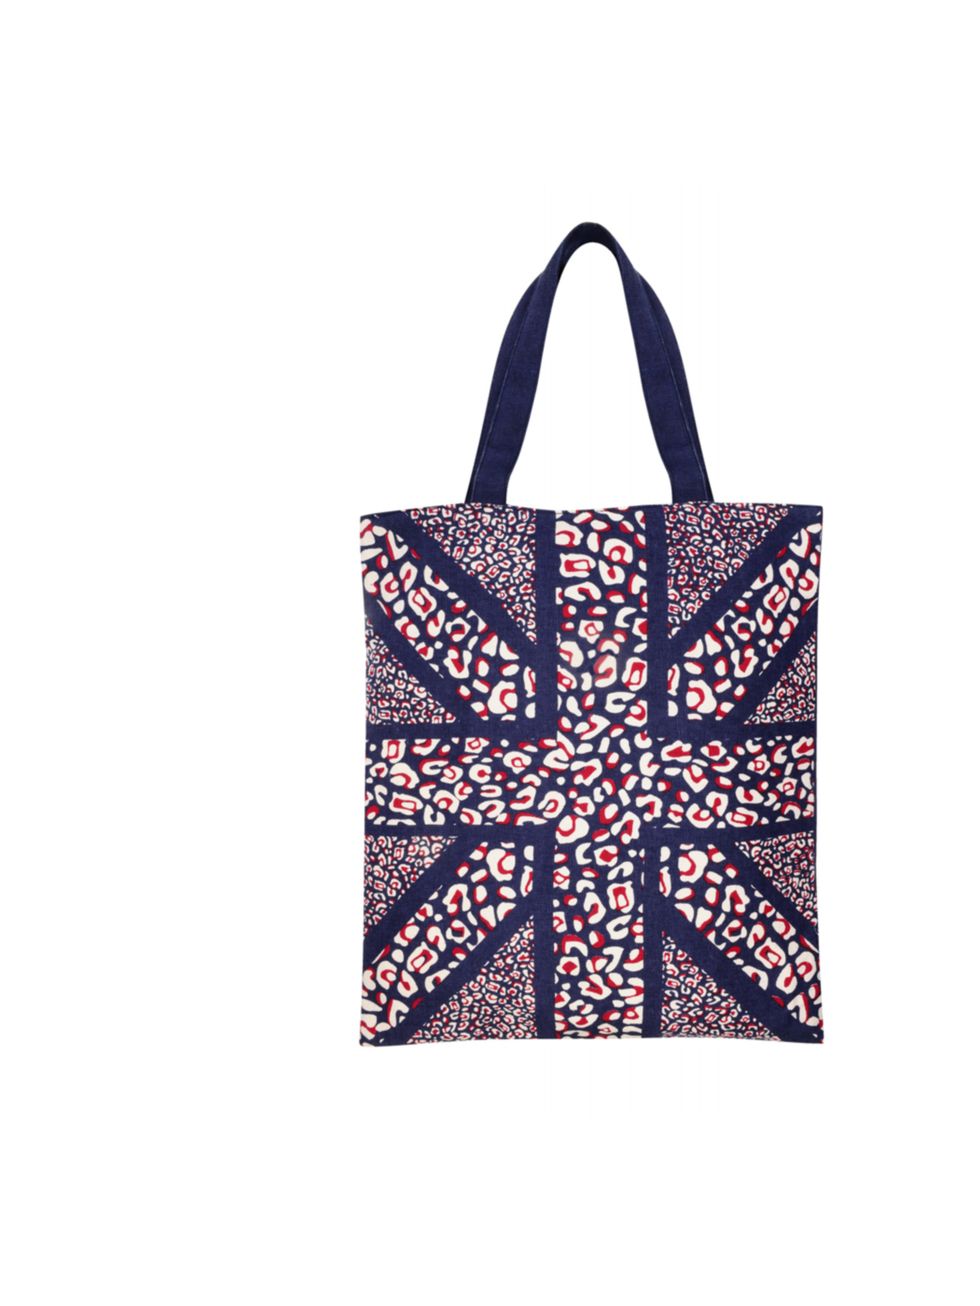 <p>Whether you fill it with your gym kit or bunting and cucumber sandwiches, nod to the Jubilee with this cute carry-all <a href="http://www.dorothyperkins.com/webapp/wcs/stores/servlet/ProductDisplay?beginIndex=0&amp;viewAllFlag=&amp;catalogId=33053&amp